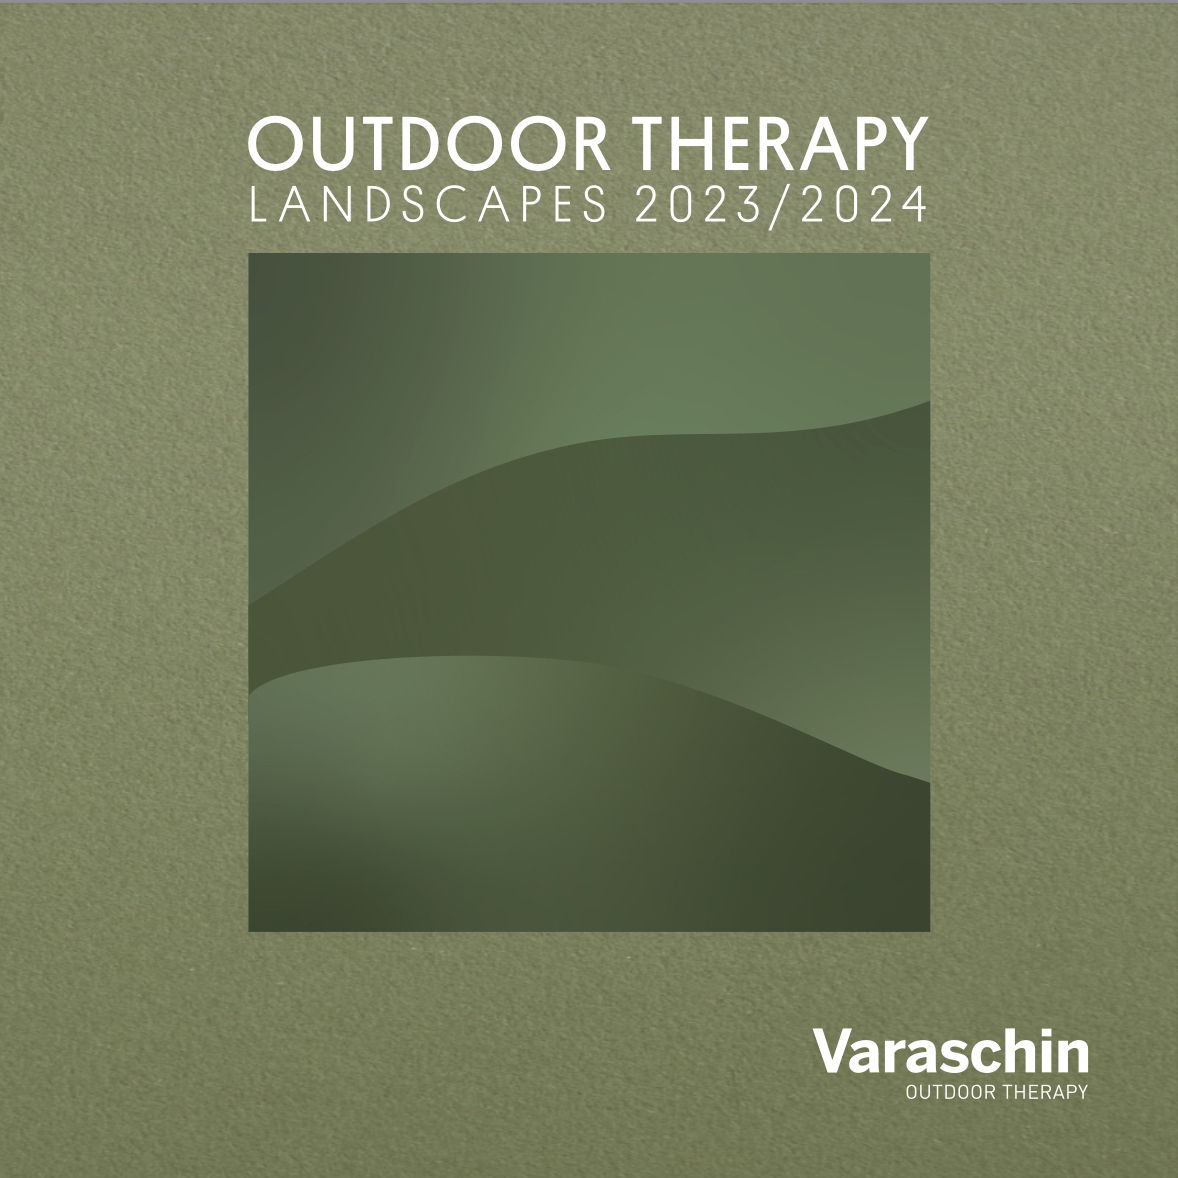 Varaschin Outdoor Therapy 2023/24